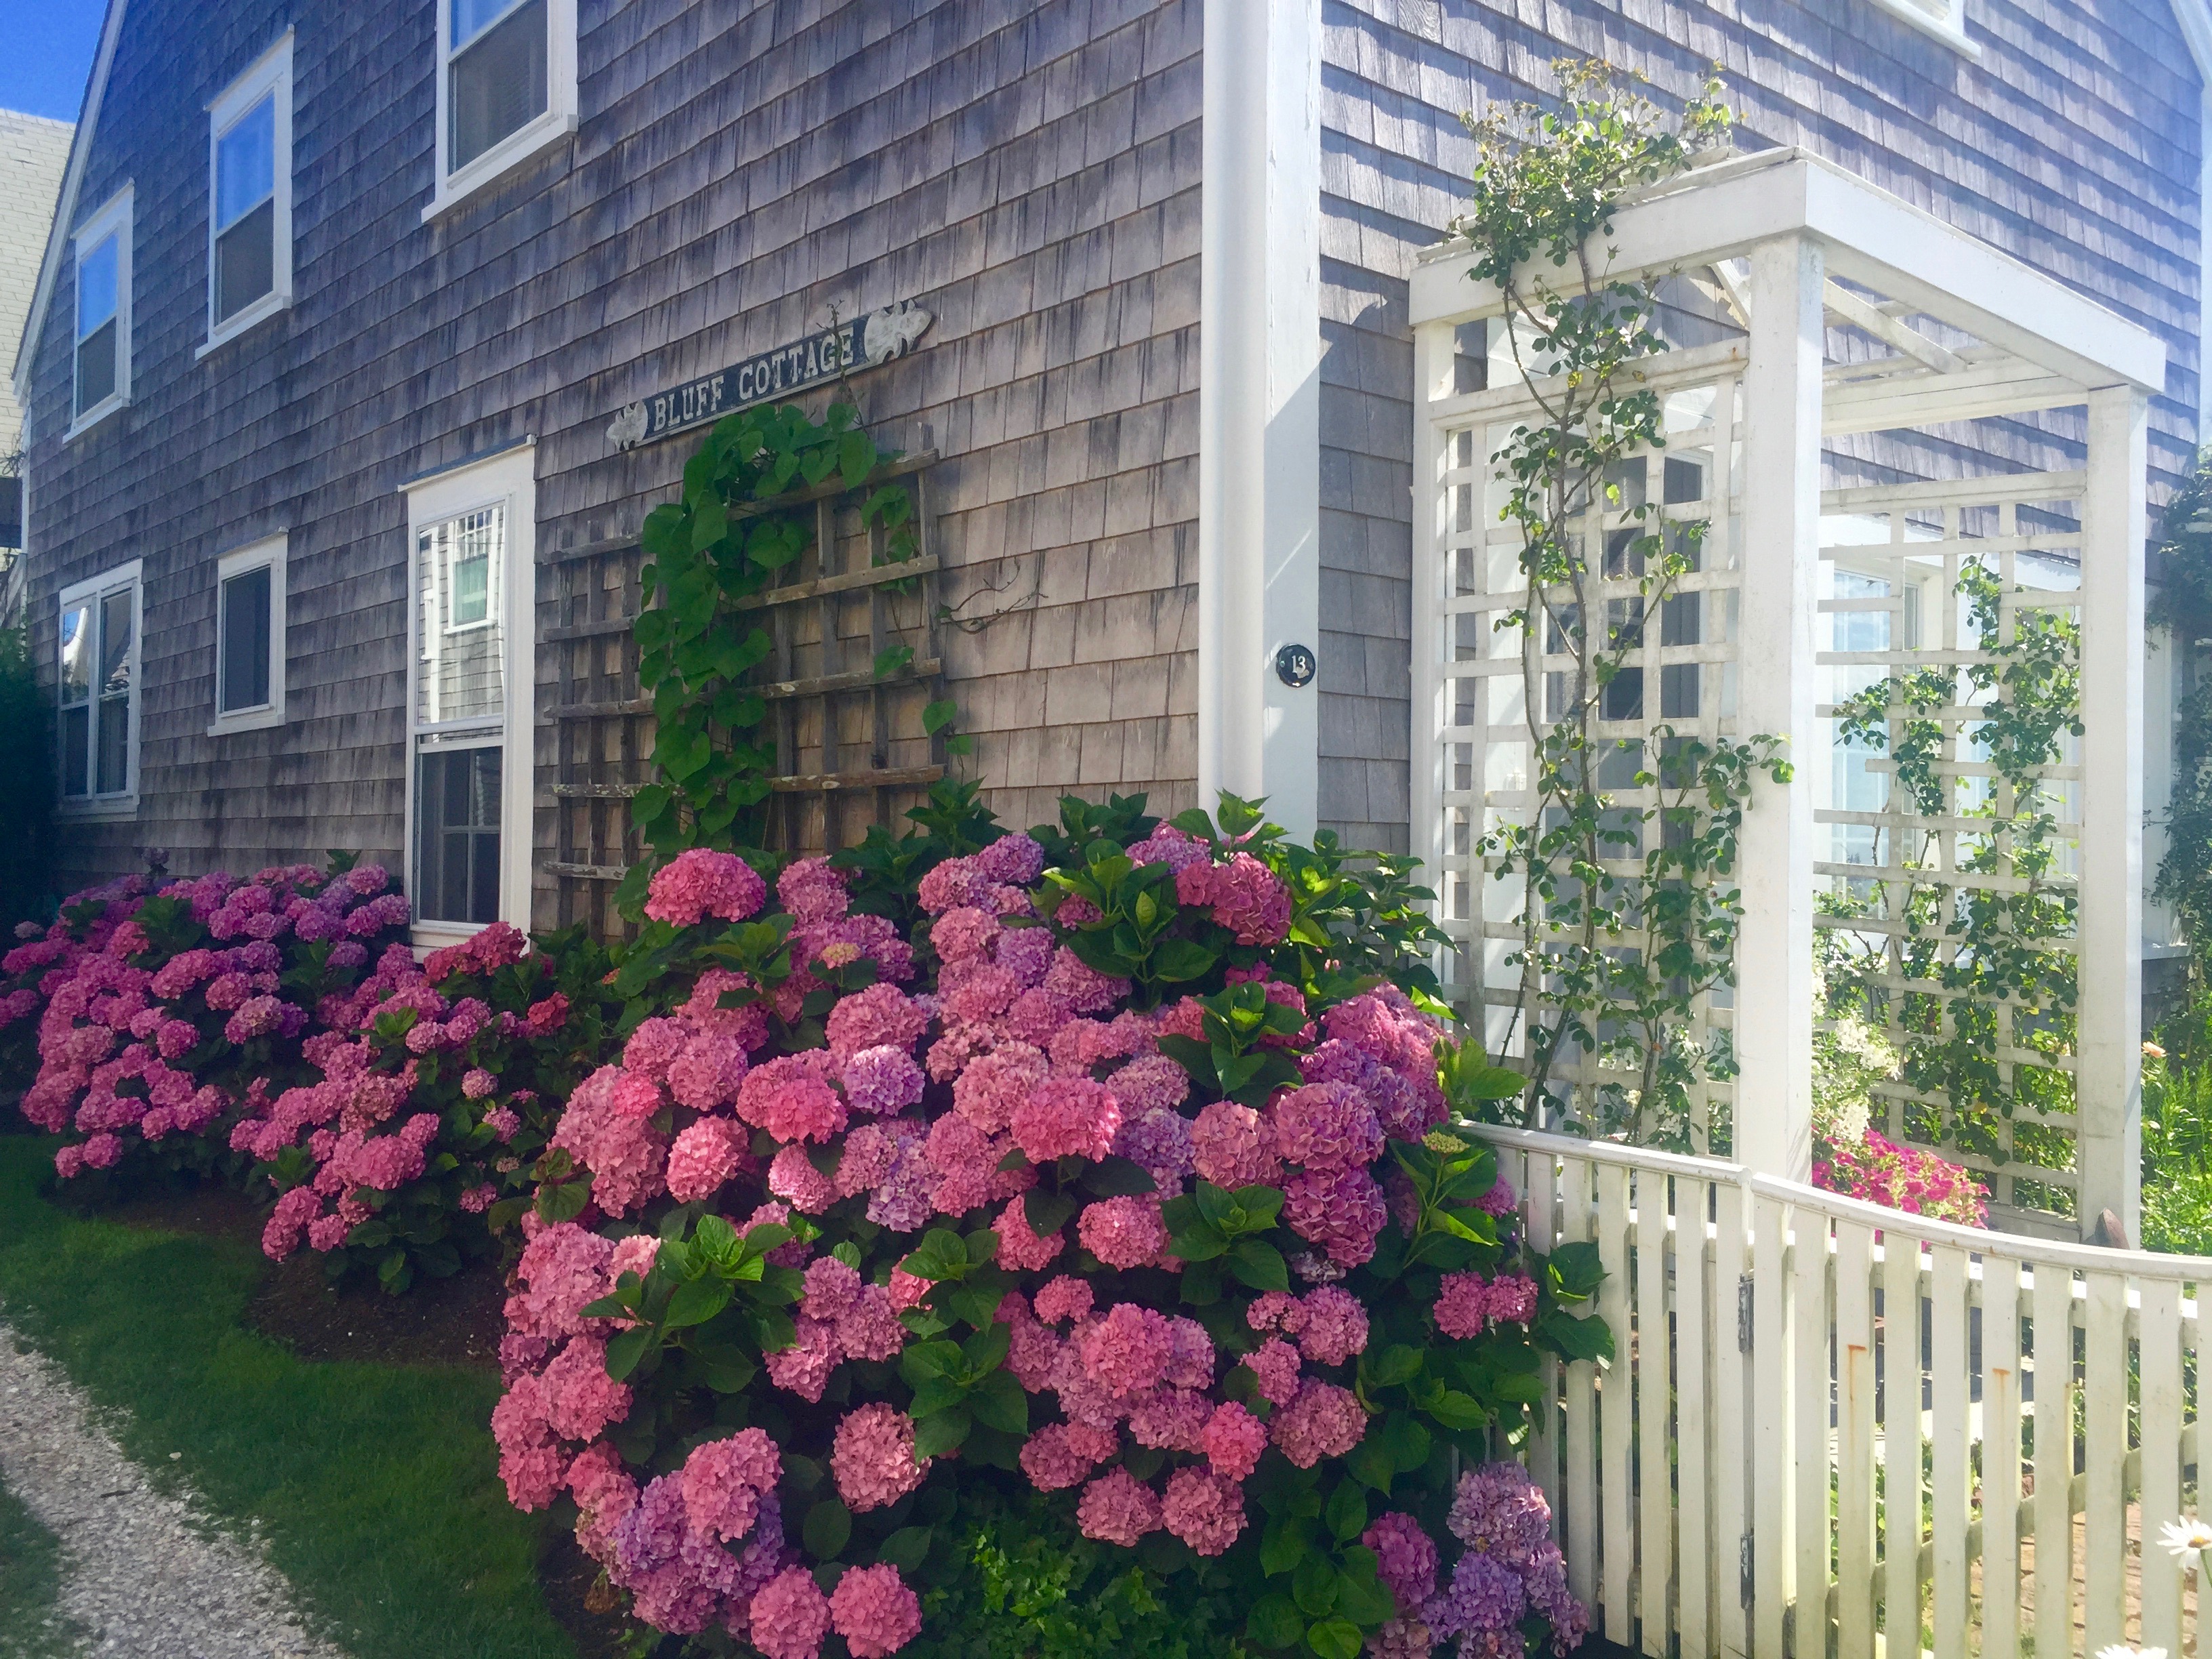 Photos of Nantucket by Christina Dandar for The Potted Boxwood 2